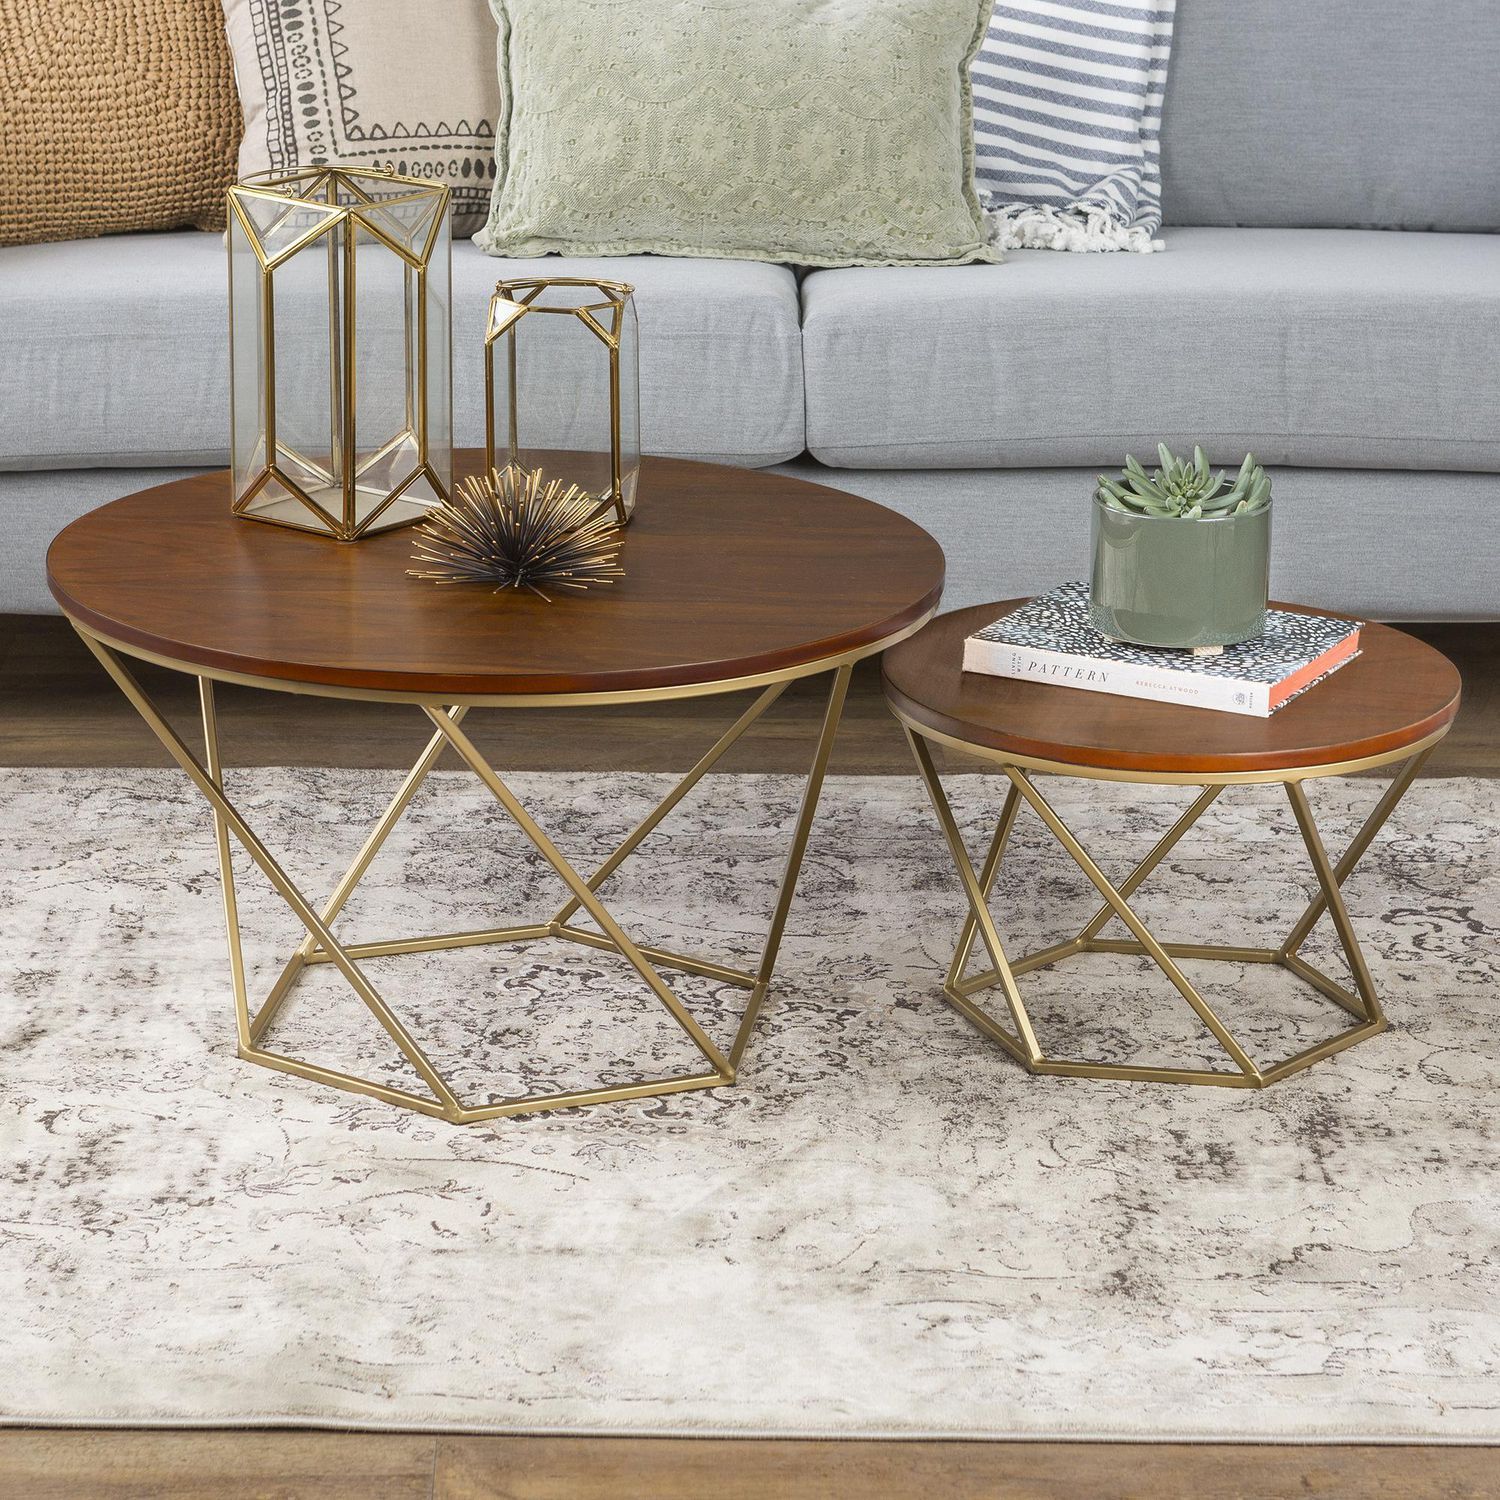 Manor Park Modern Nesting Coffee Table, Set Of 2 – Walnut/gold With Nesting Coffee Tables (Gallery 13 of 20)